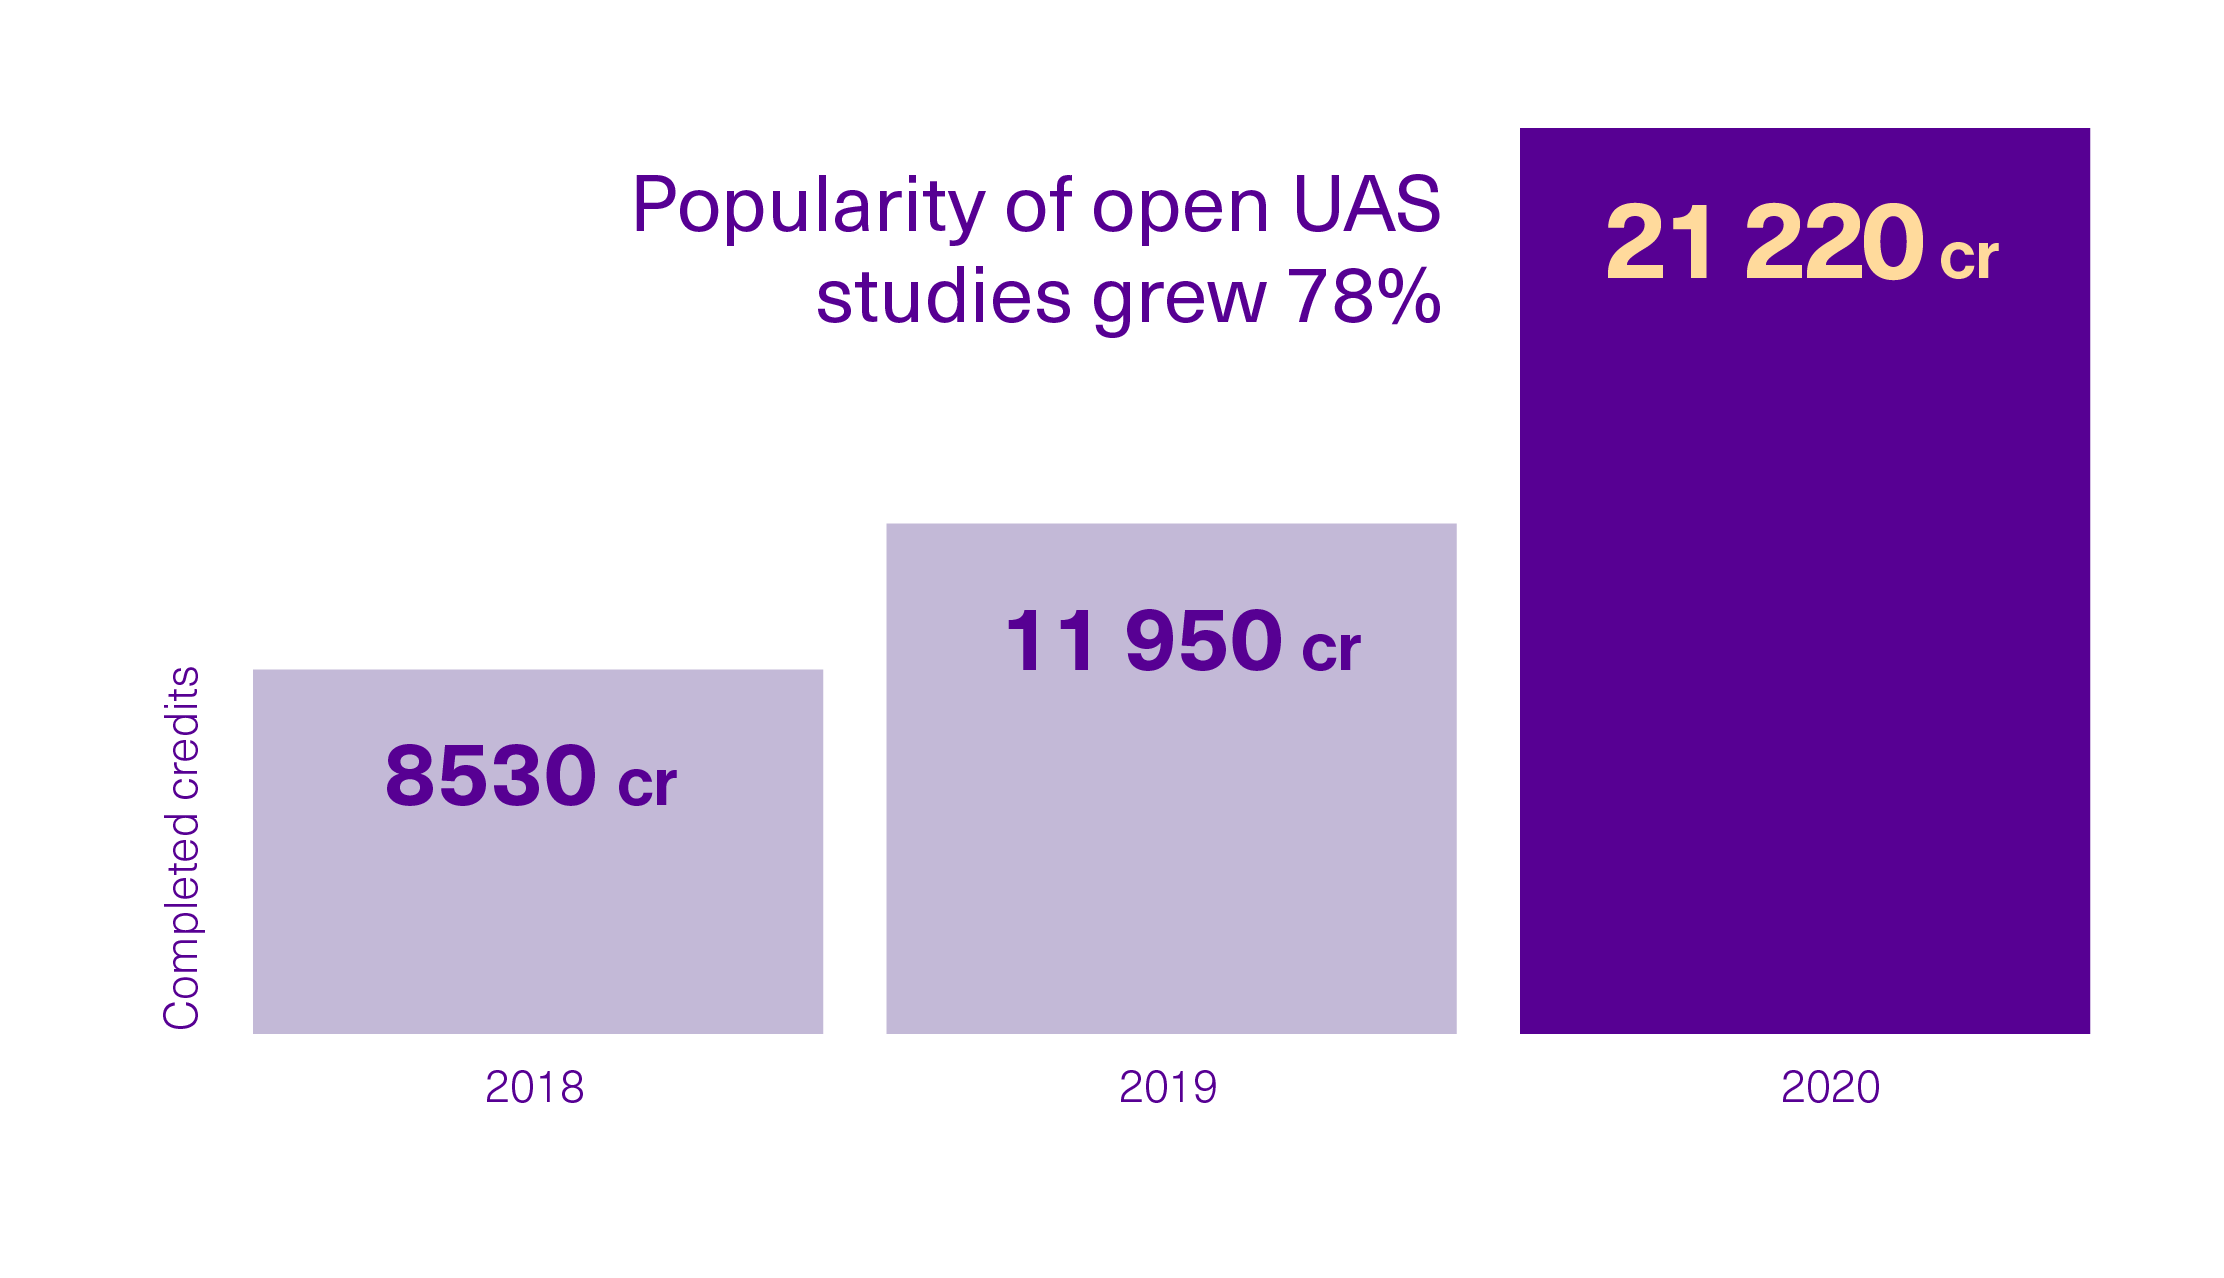 Completed credits at the open university of applied sciences in 2018-2020.